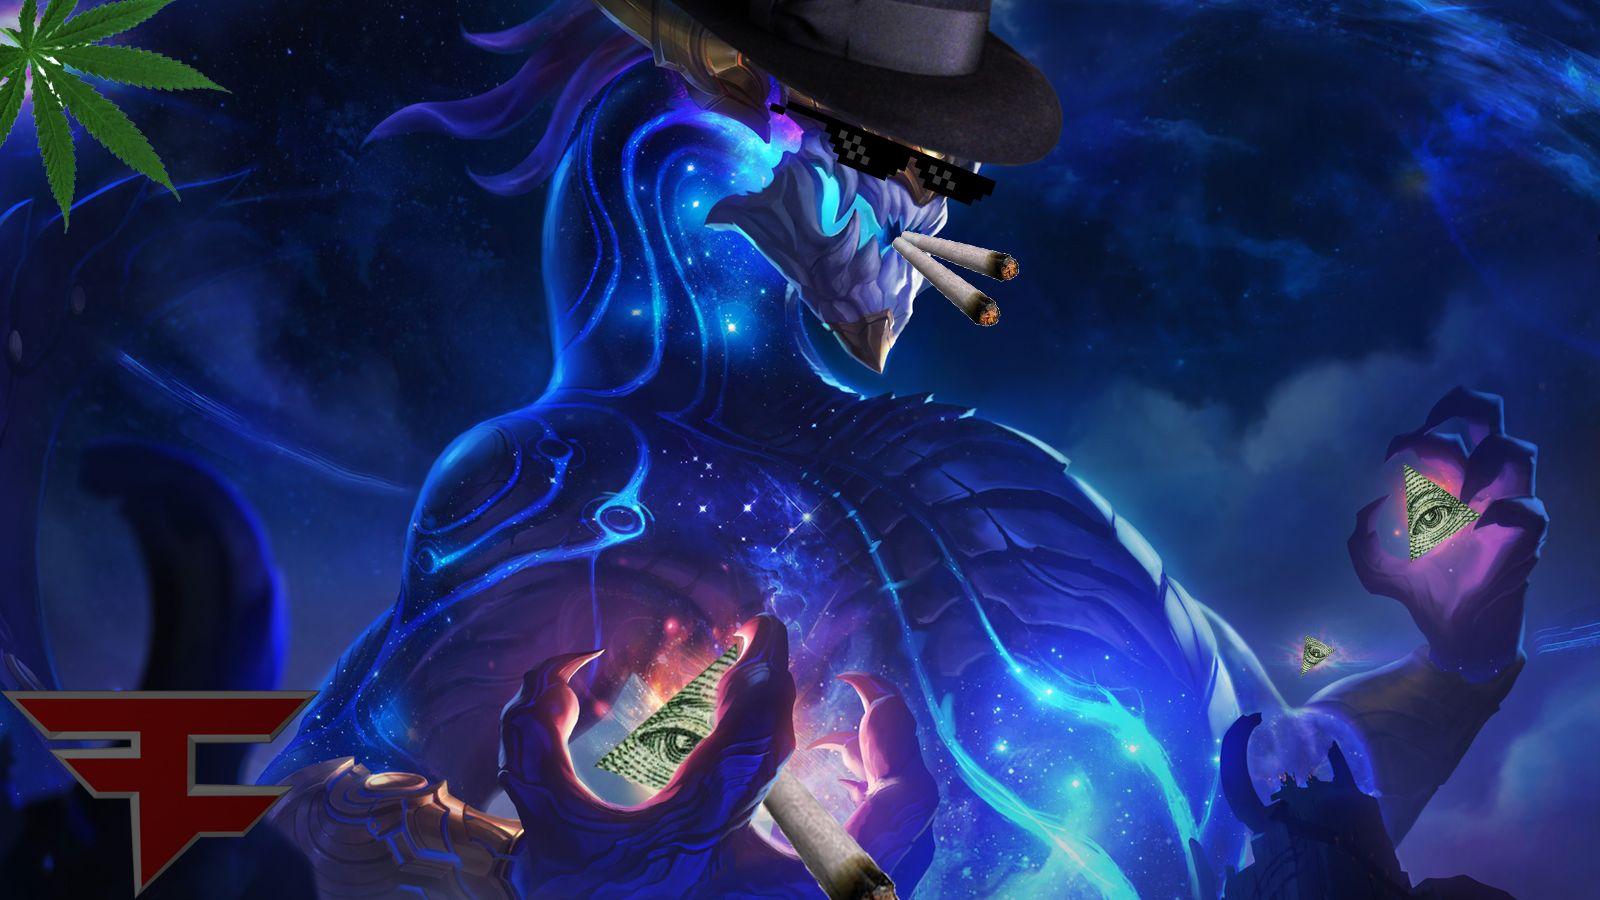 Aurelion Sol's True Form! (Sorry, forgot to post this on release day.)